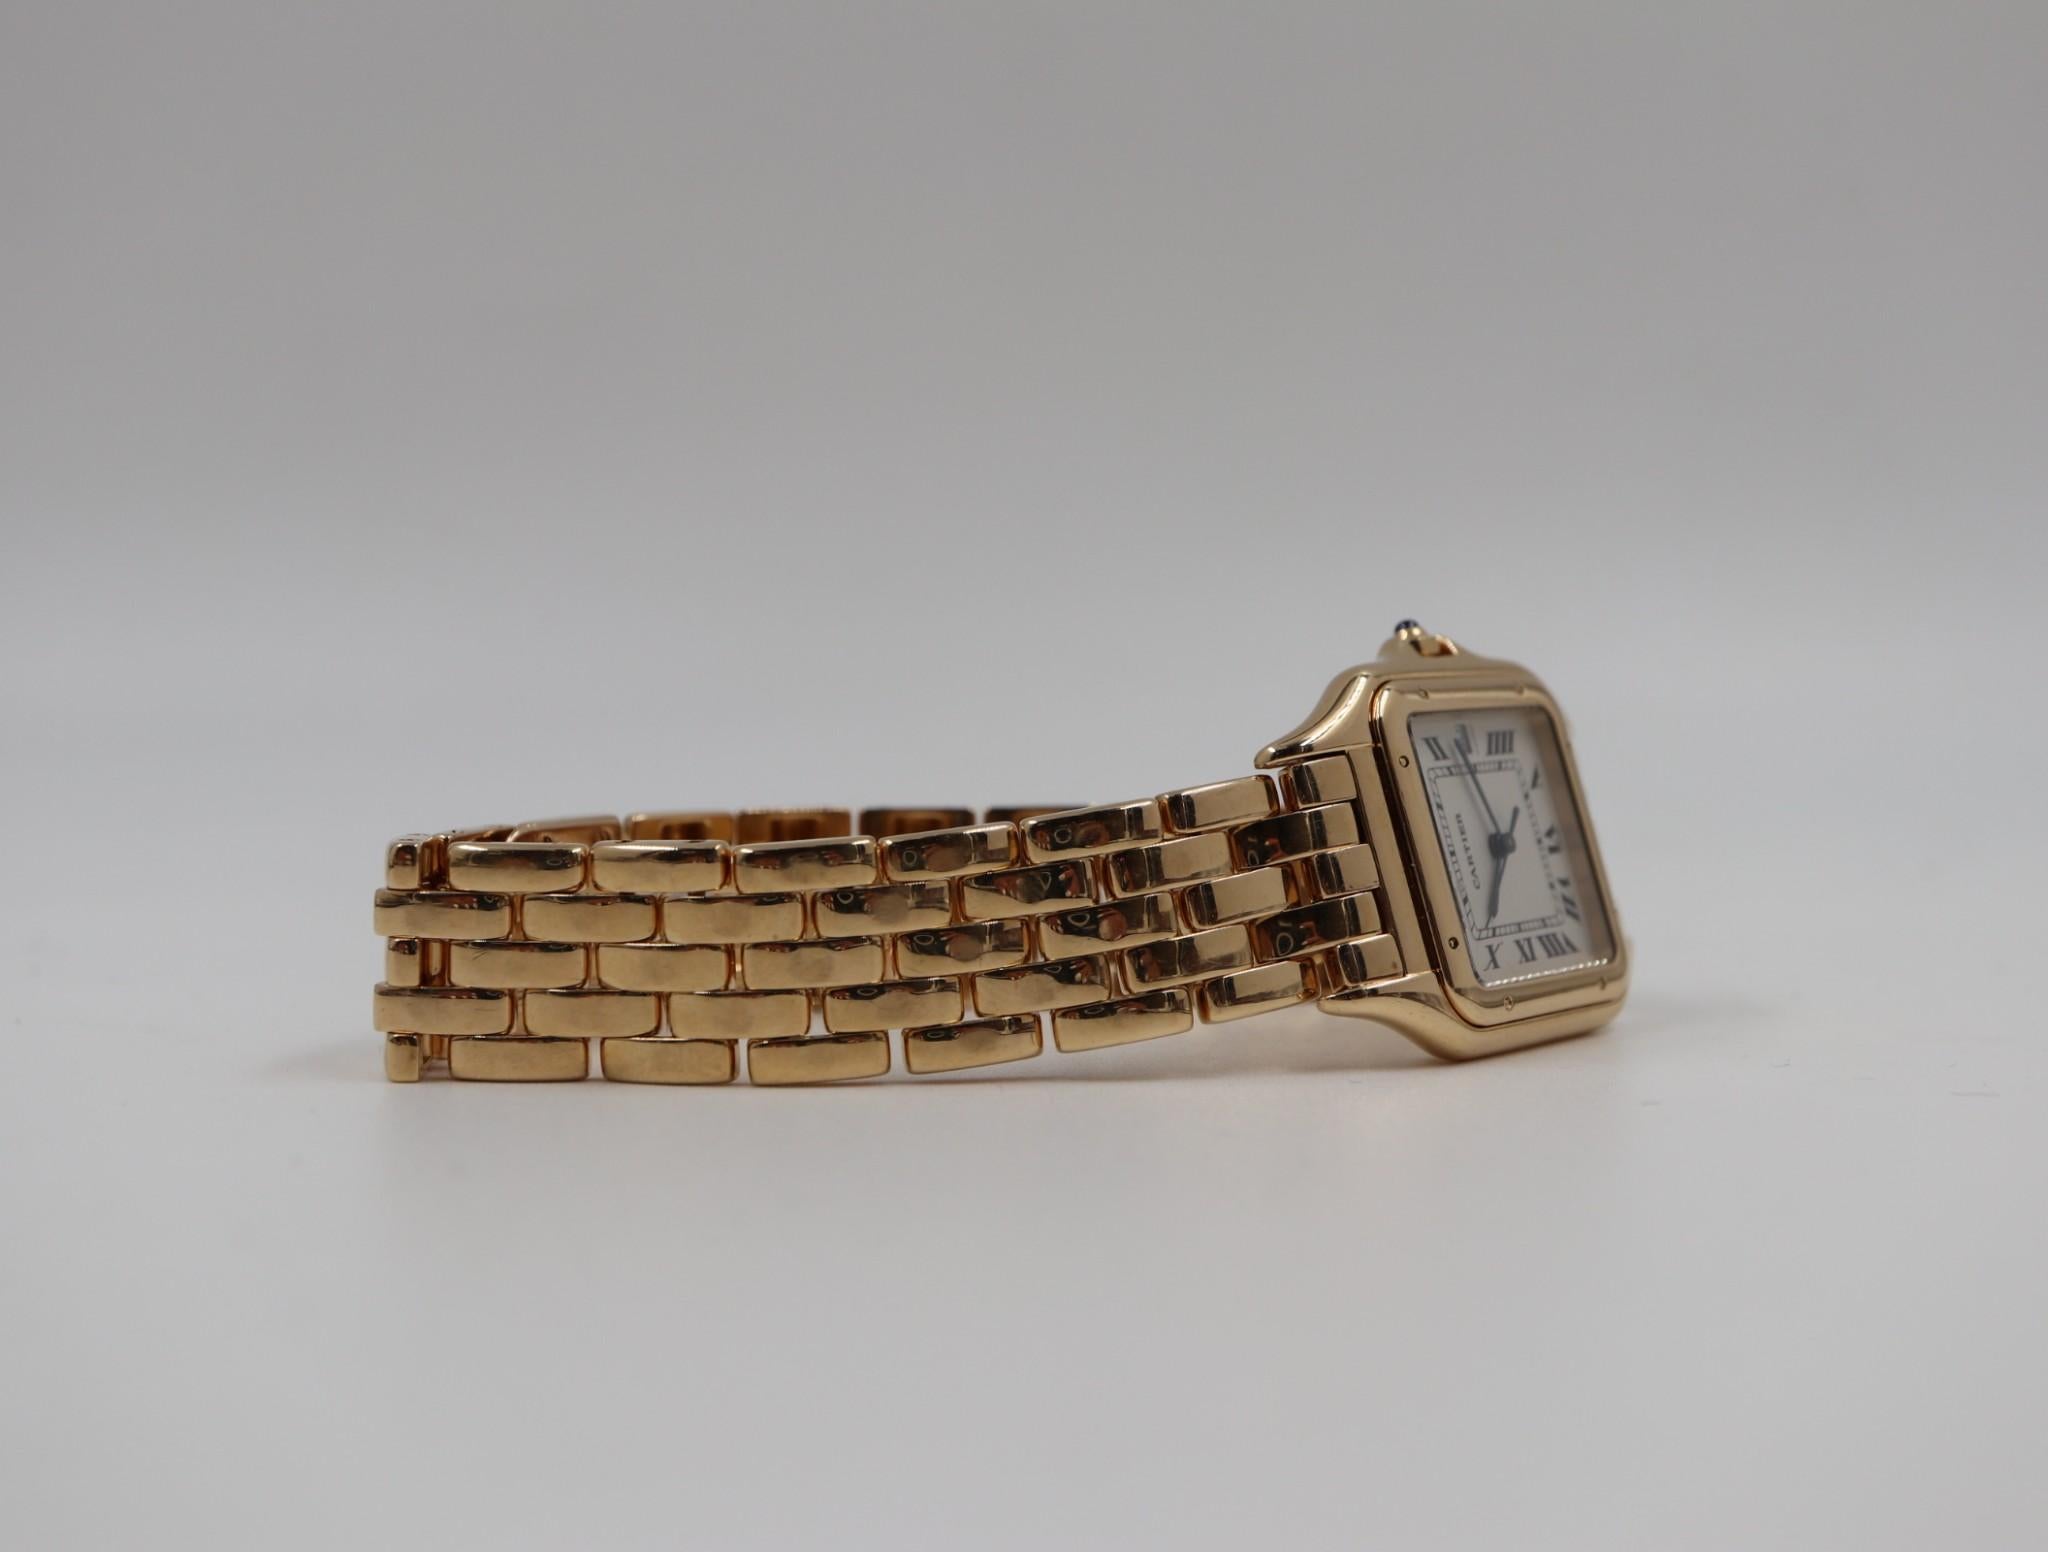 This exact watch is worn by Charlie Sheen in the 1987 movie Wall Street. It is a special coveted watch perfect for any watch collector or anyone who loves Charlie Sheen. Pre-owned Cartier Panthere designed in 18 karat yellow gold. Date window at 3